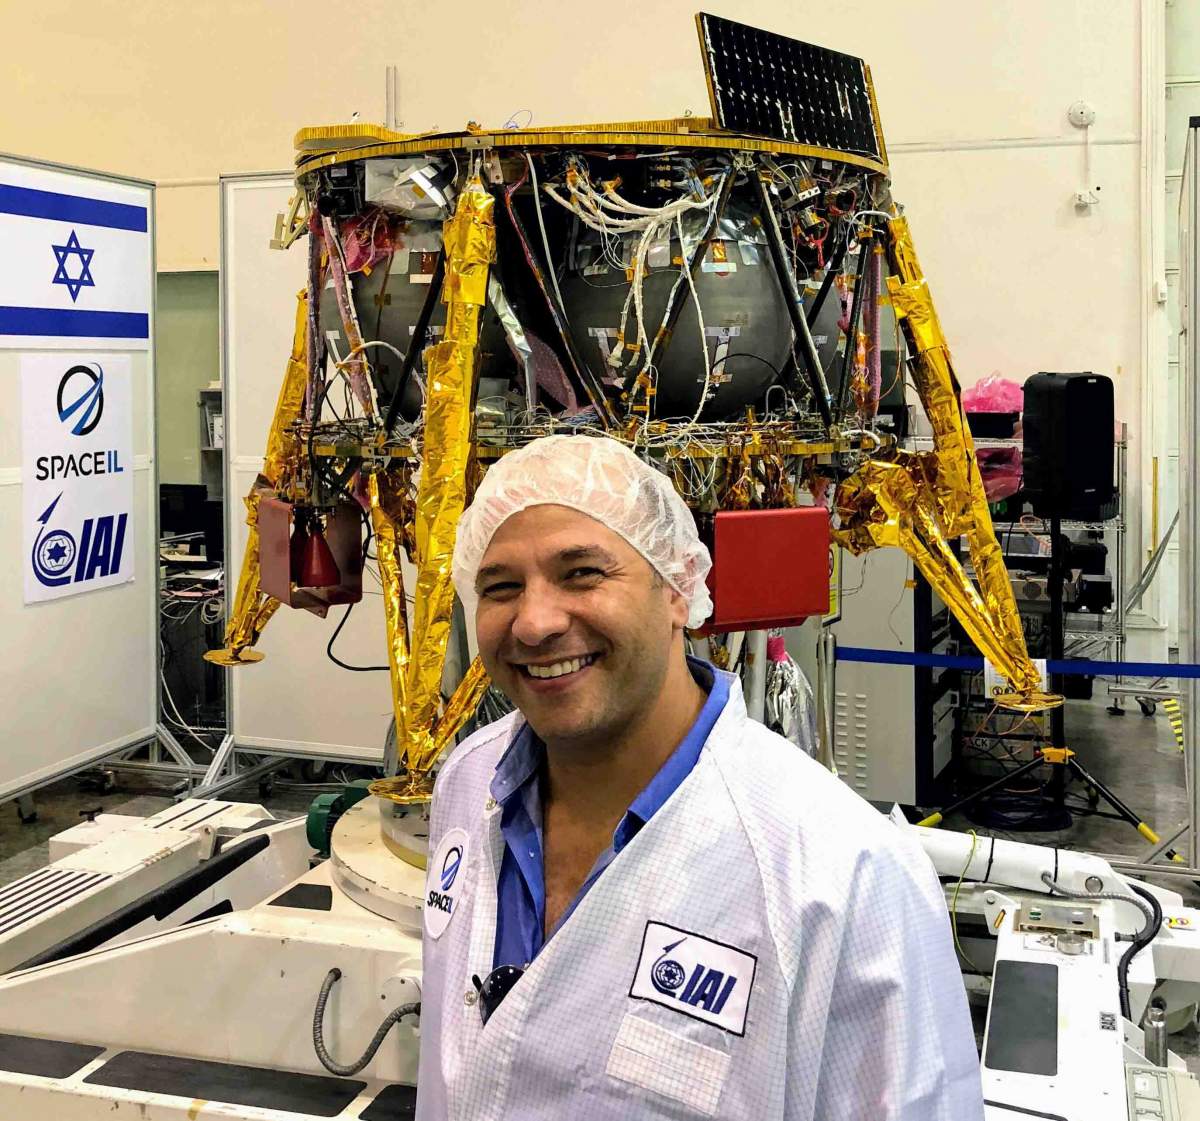 Israel’s First Moon Mission Will Conduct Scientific Measurements